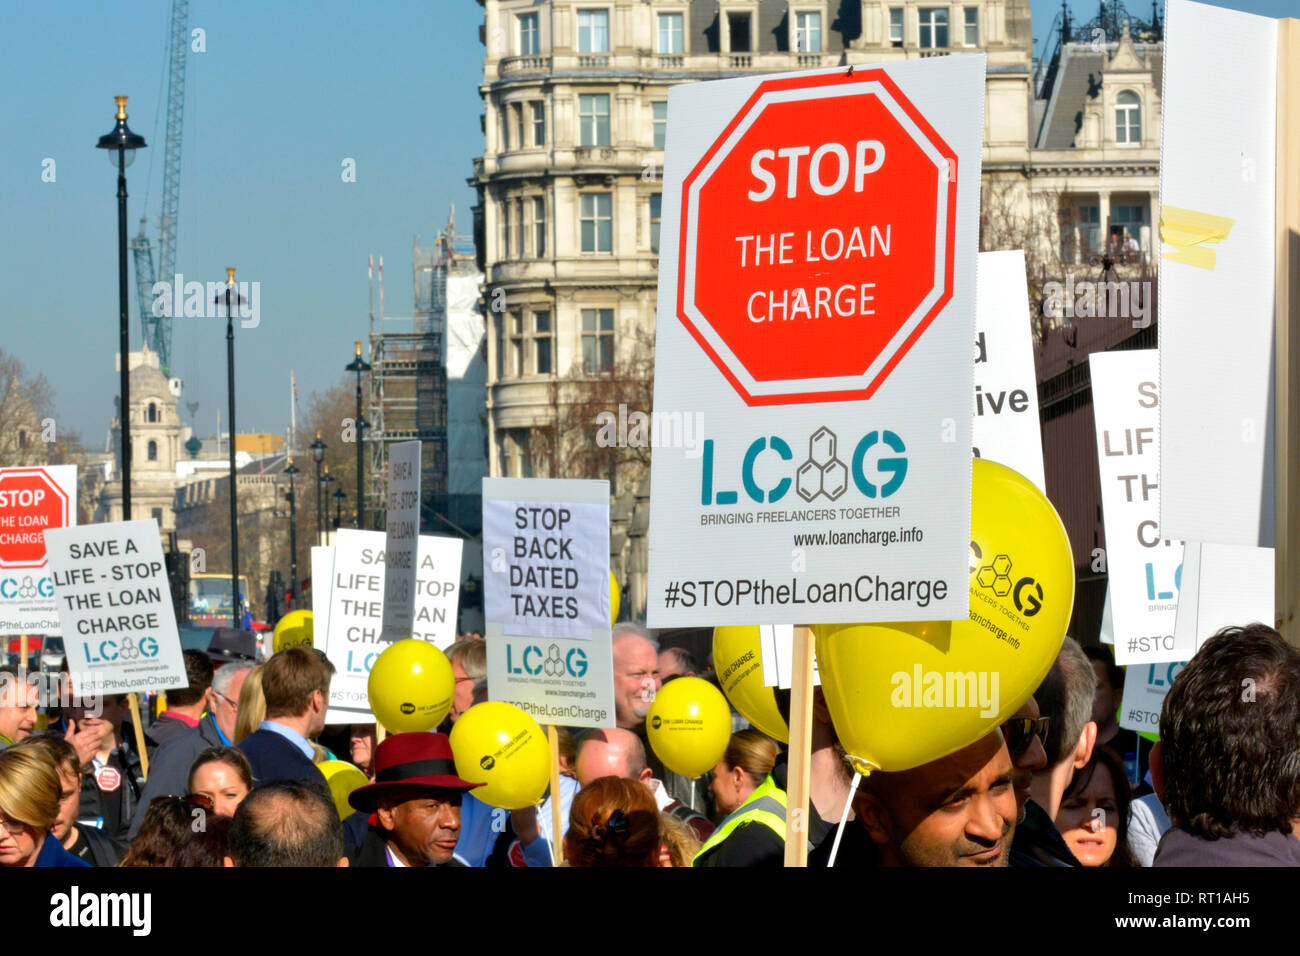 London, 27th Feb. The Loan Charge Action Group - formed to raise awareness of the retrospective tax charge introduced by HM Government in the 2017 Budget demonstrates outside Parliament Credit: PjrNews Stock Photo